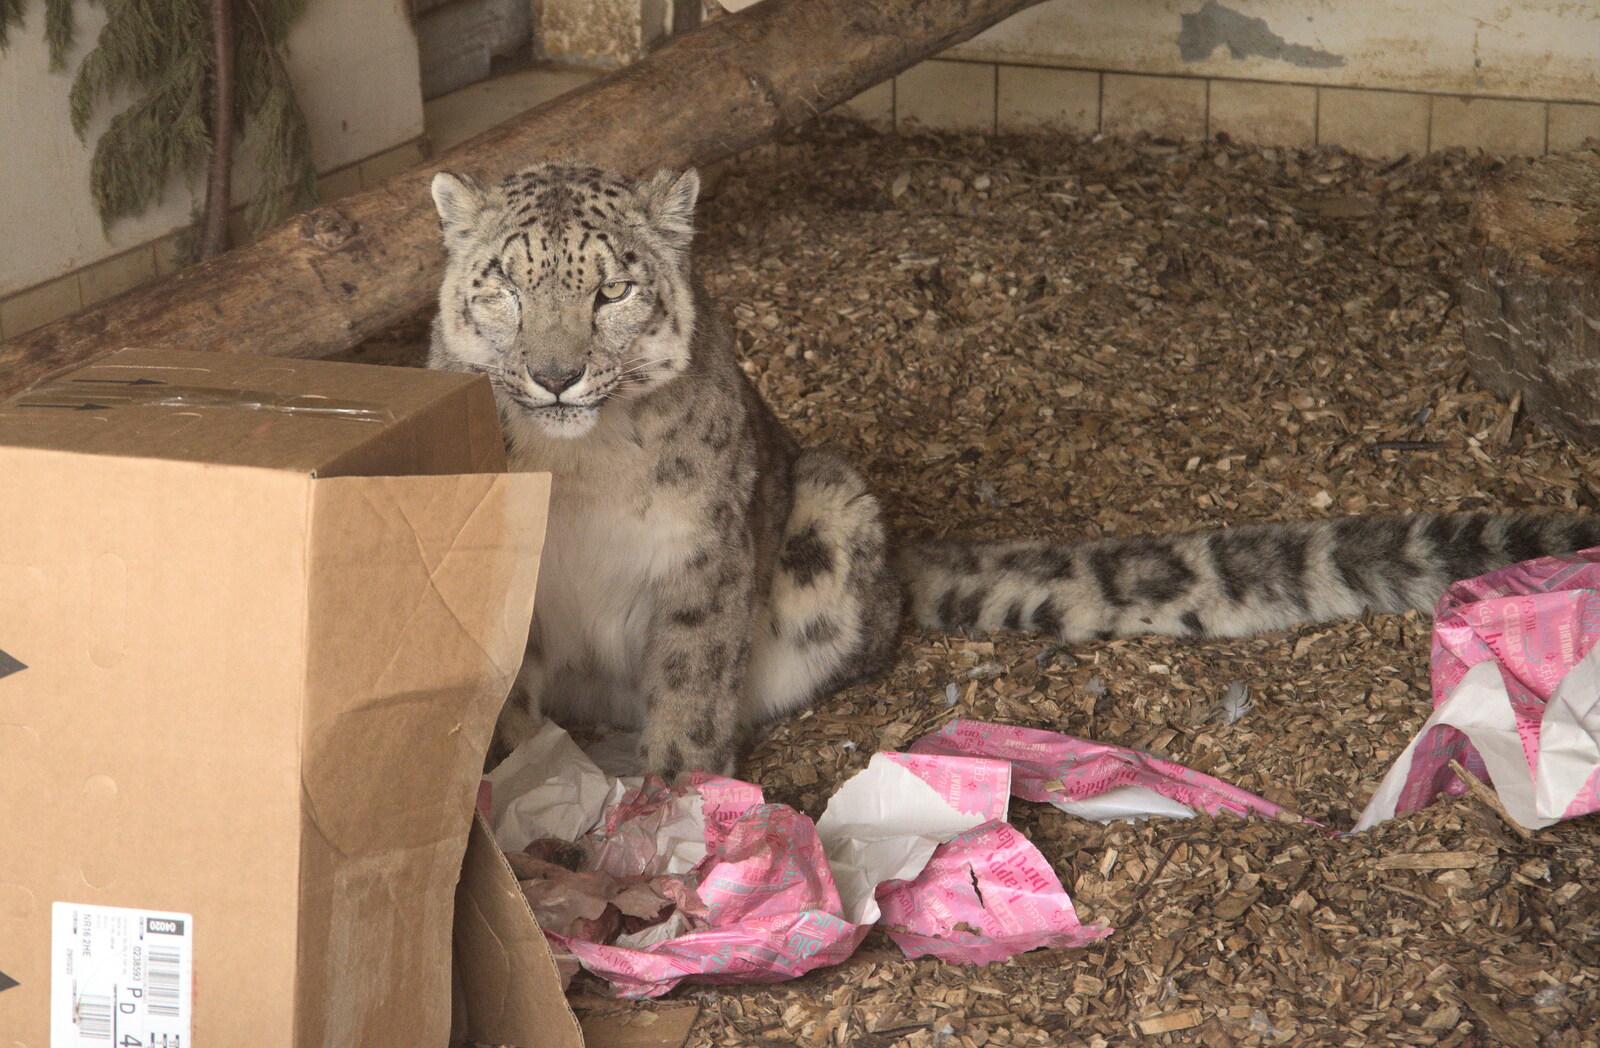 The one-eyed Snow Leopard plays with a box from A Moth Infestation and a Trip to the Zoo, Banham, Norfolk - 21st May 2022